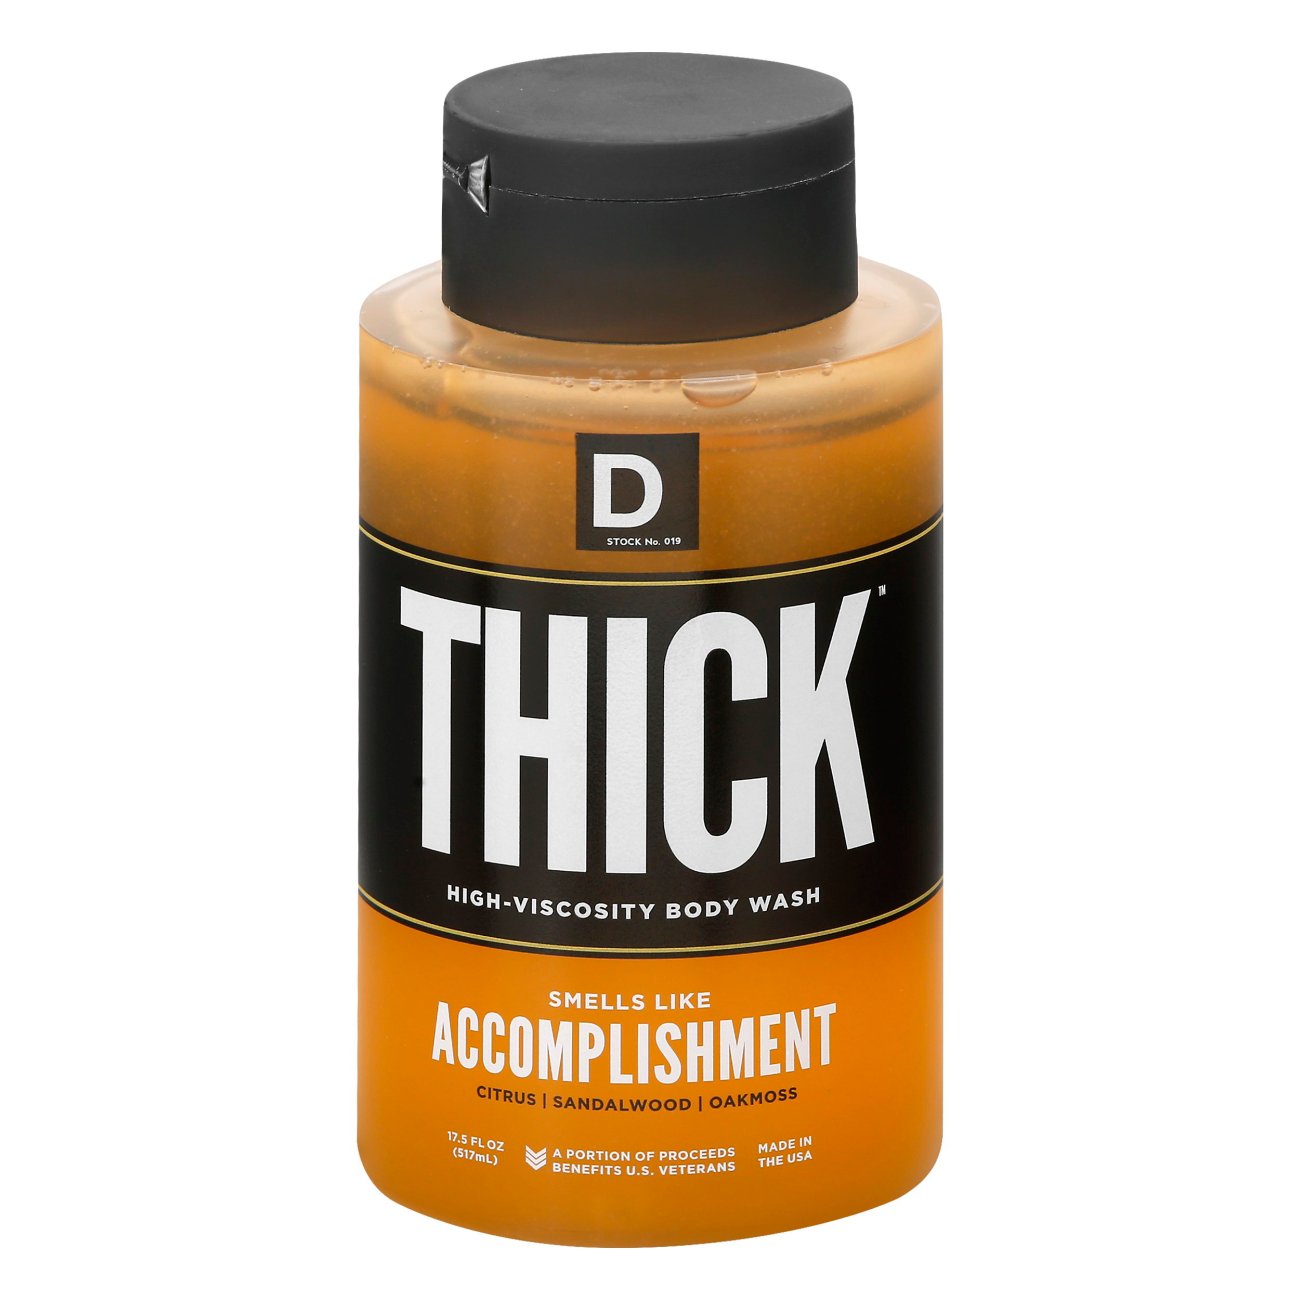 Duke Cannon Thick High Viscosity Body Wash Accomplishment Shop Cleansers And Soaps At H E B 